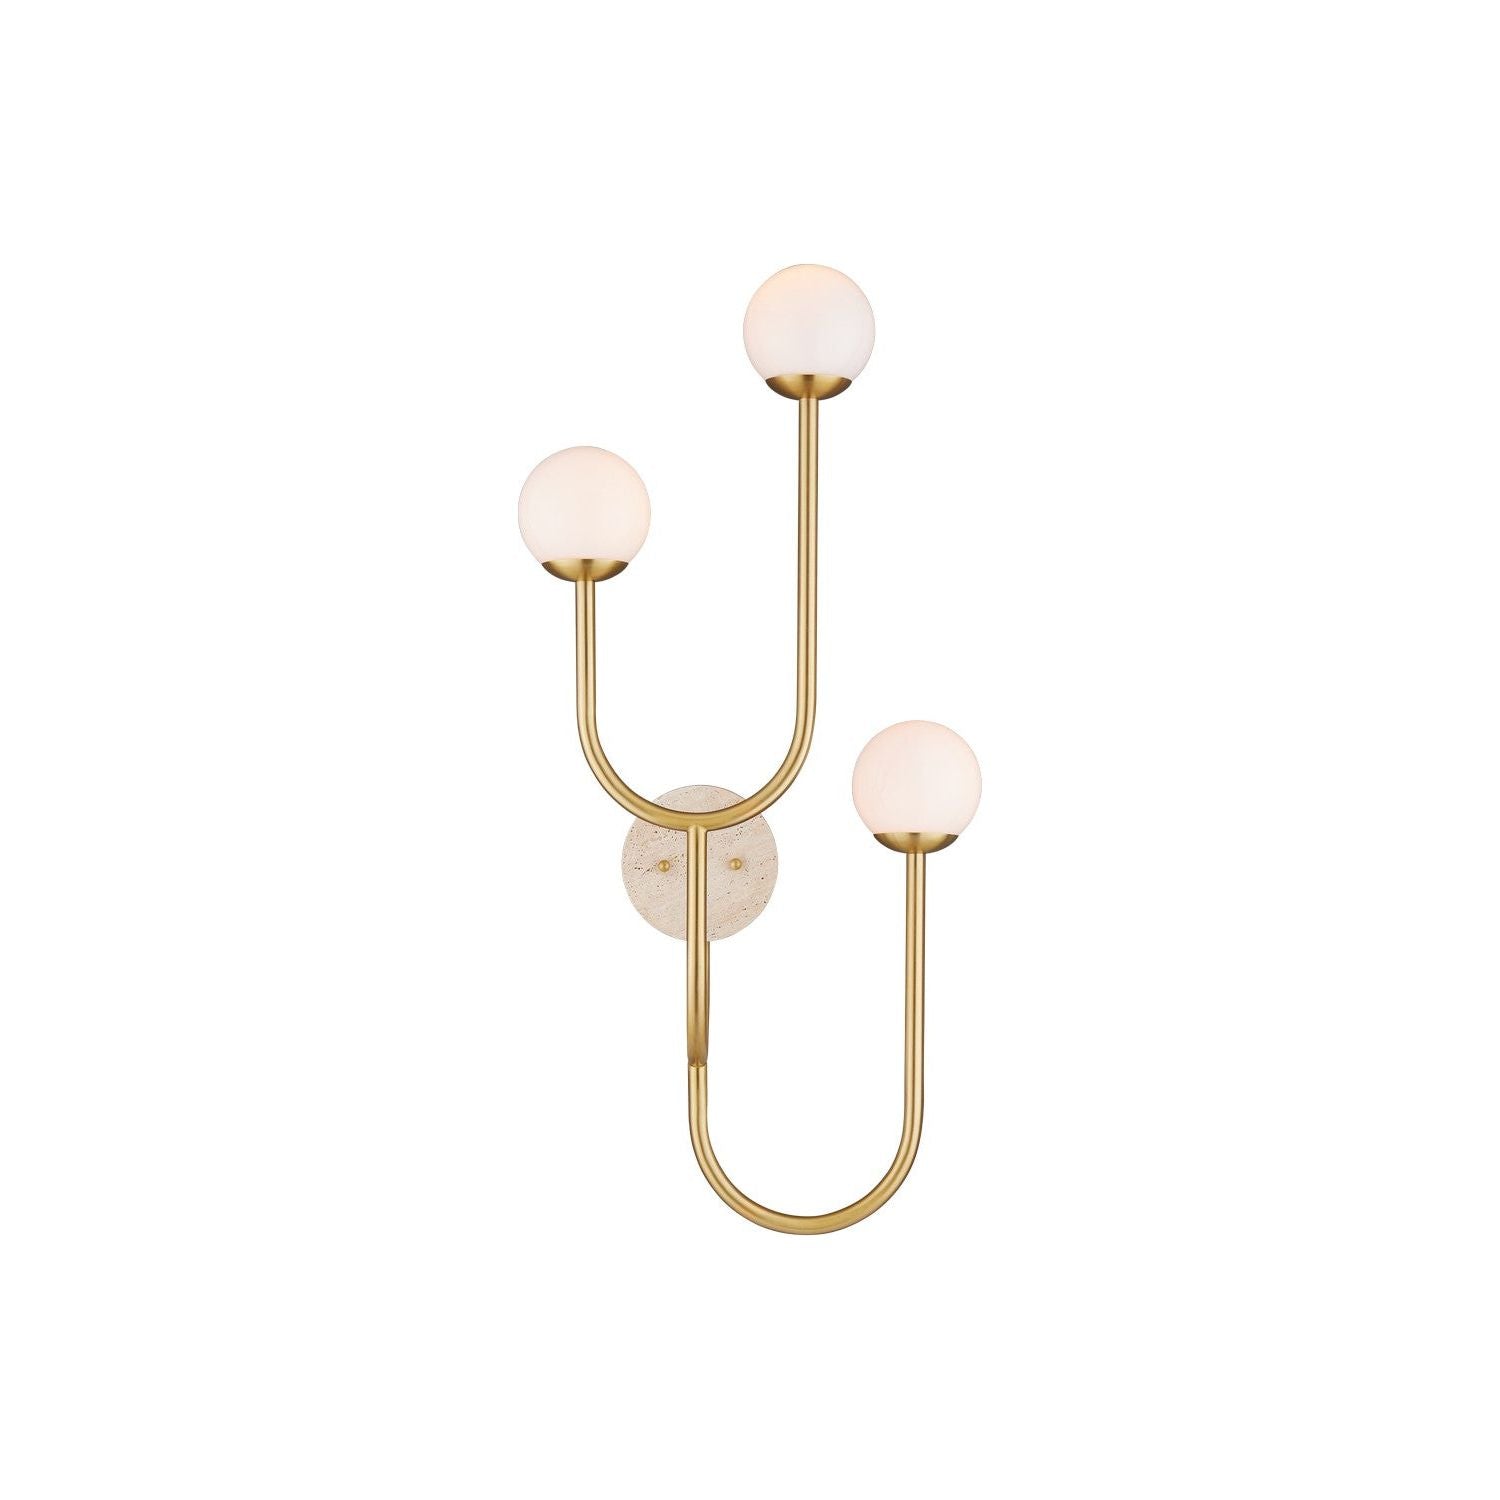 Currey and Company - 5000-0257 - Three Light Wall Sconce - Brass/Natural/White